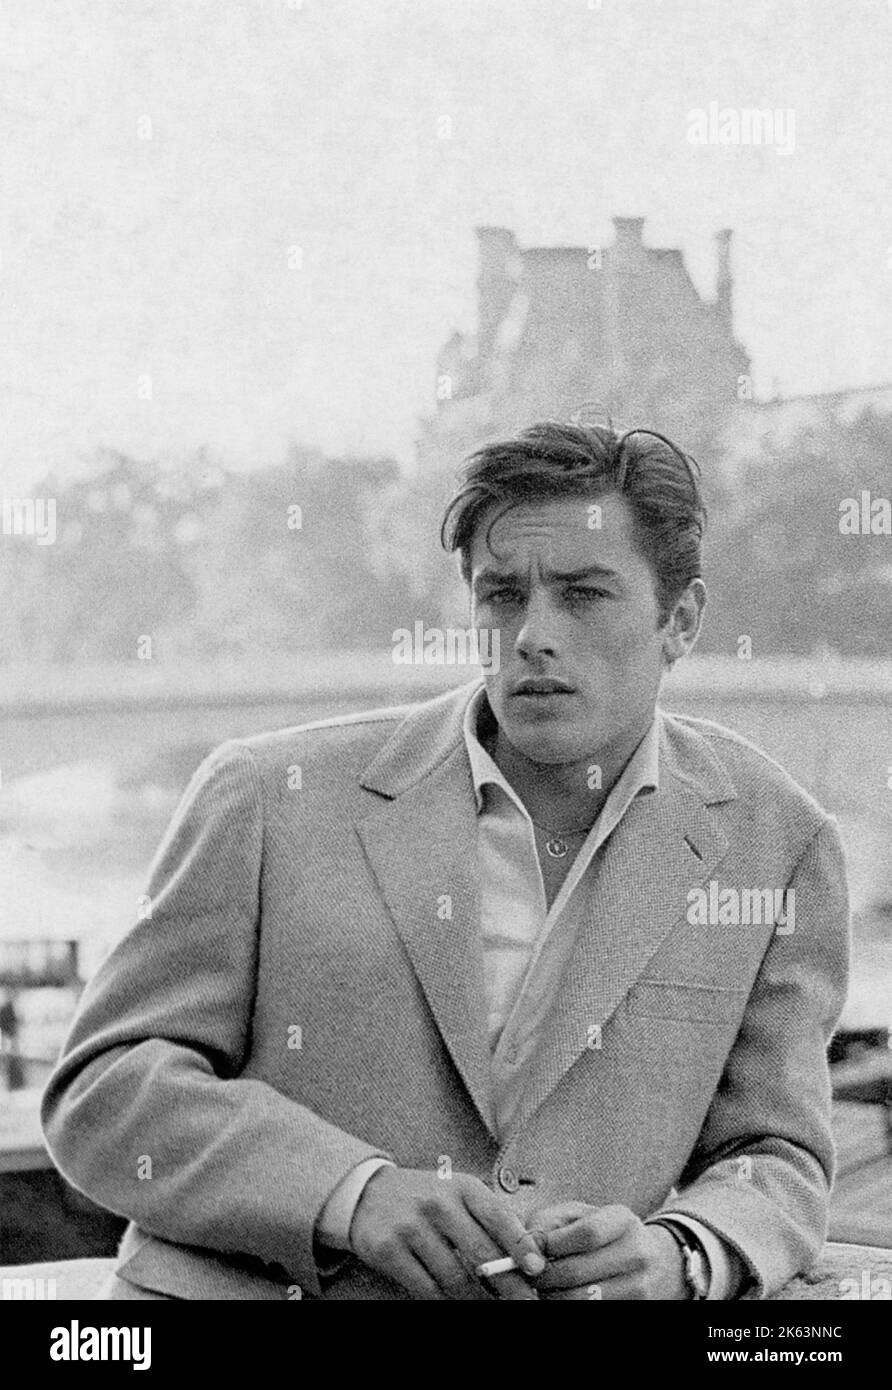 ALAIN DELON  French film actor who appeared in British and American films      Date: 1935 - Stock Photo